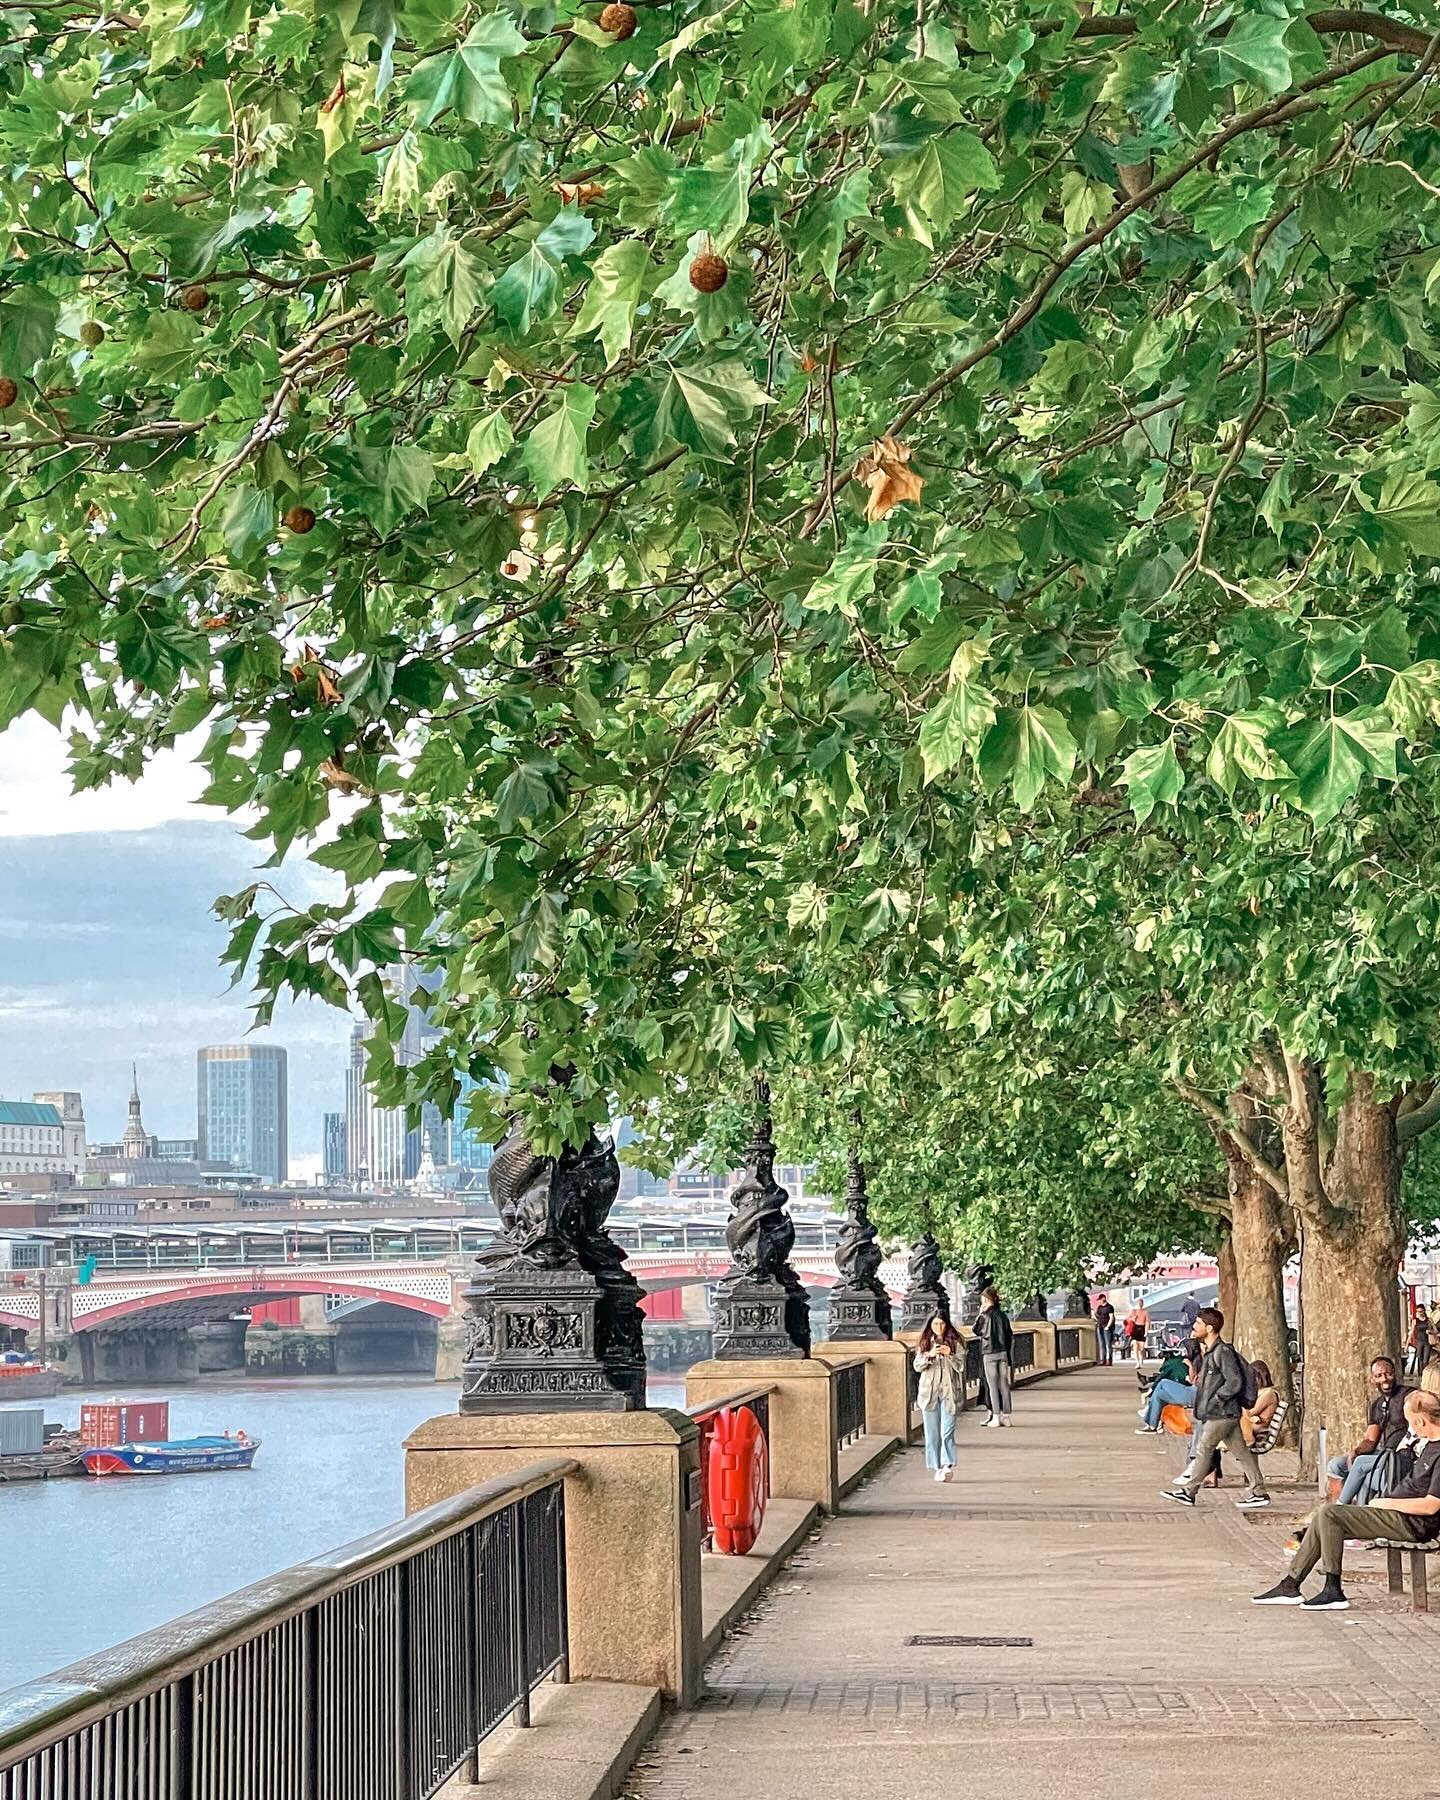 I don&rsquo;t know about you, but I&rsquo;m 100% ready for summer scenes like these. 

Wish you were here,
Xoxo

#summerinlondon #londonsummer #itssolondon #thisislondon #londoncityworld